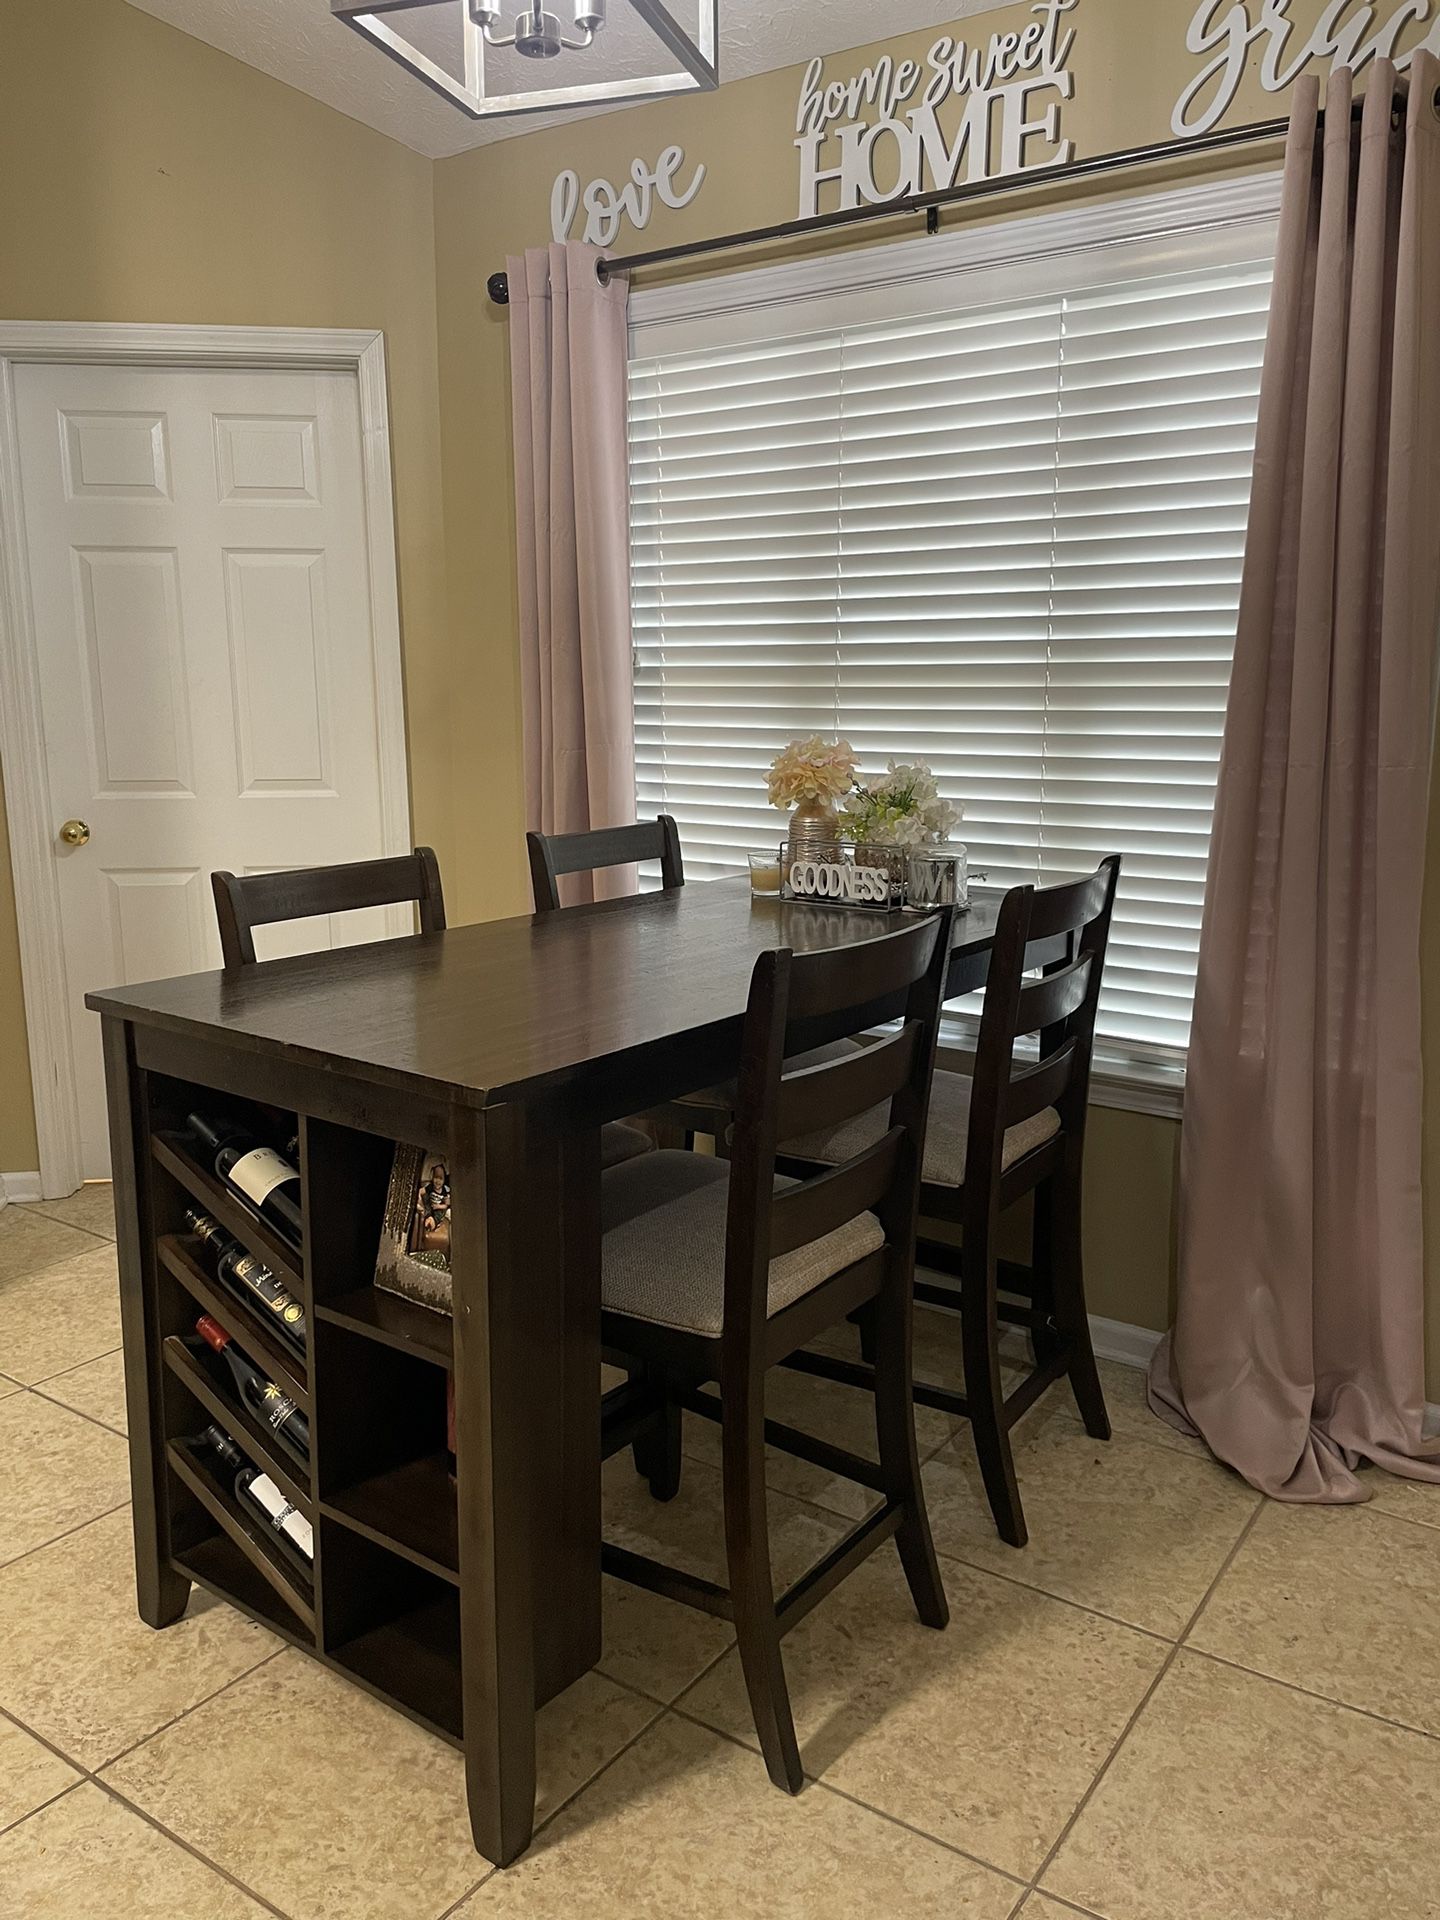 Kitchen Table & Chairs With Built-in Wine Rack & Shelves